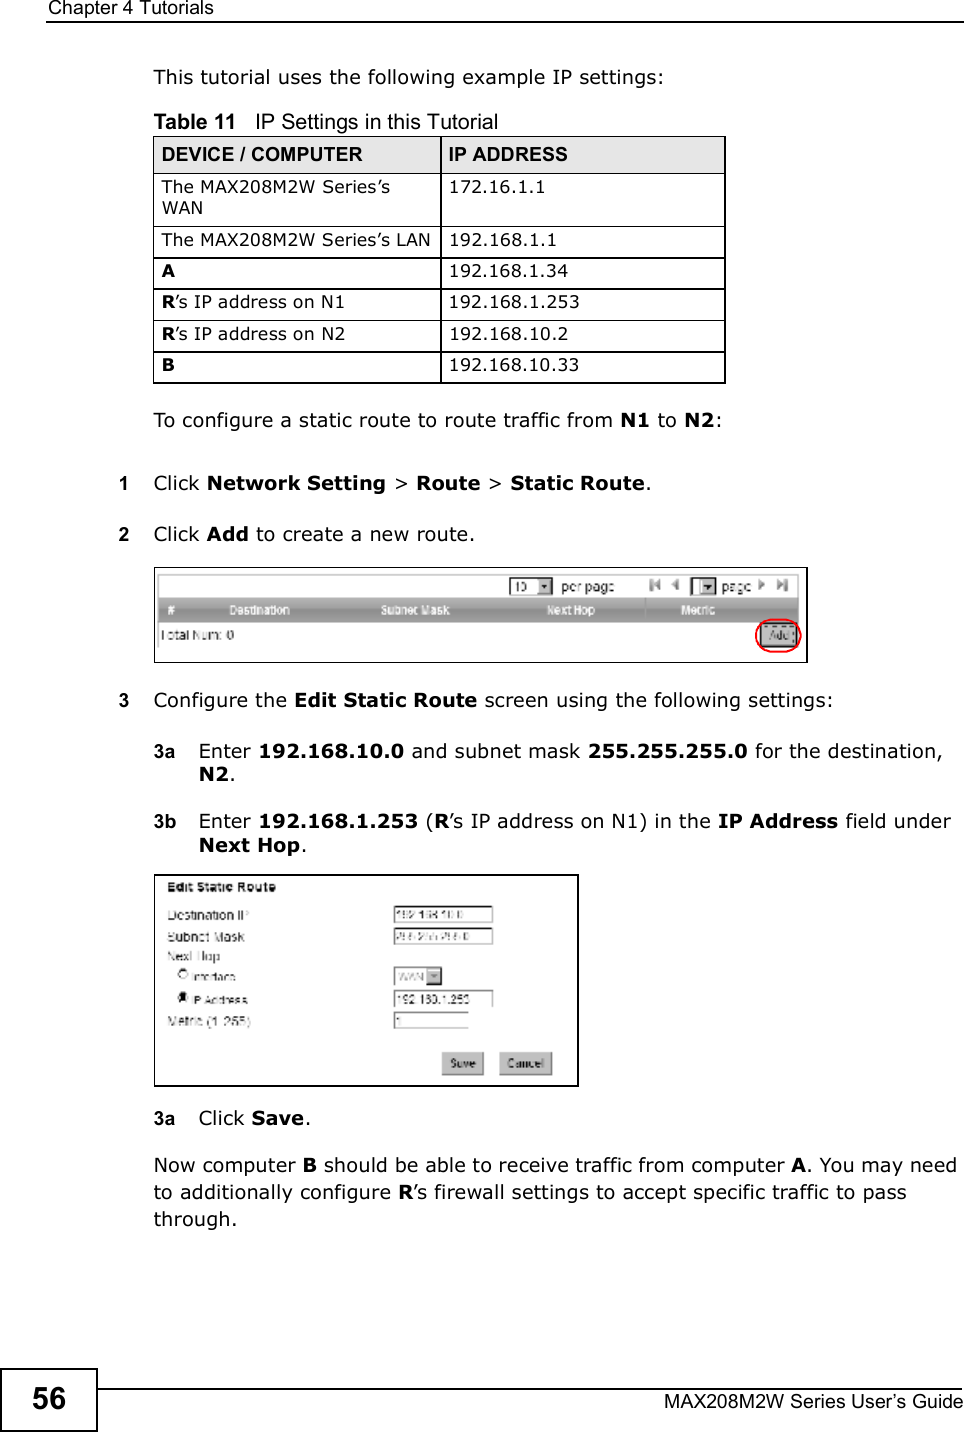 Chapter 4TutorialsMAX208M2W Series User s Guide56This tutorial uses the following example IP settings:To configure a static route to route traffic from N1 to N2:1Click Network Setting &gt; Route &gt; Static Route.2Click Add to create a new route.3Configure the Edit Static Route screen using the following settings:3a Enter 192.168.10.0 and subnet mask 255.255.255.0 for the destination, N2.3b Enter 192.168.1.253 (R s IP address on N1) in the IP Address field under Next Hop.3a Click Save.Now computer B should be able to receive traffic from computer A. You may need to additionally configure R s firewall settings to accept specific traffic to pass through.Table 11   IP Settings in this TutorialDEVICE / COMPUTER IP ADDRESSThe MAX208M2W Series s WAN172.16.1.1The MAX208M2W Series s LAN192.168.1.1A192.168.1.34R s IP address on N1 192.168.1.253R s IP address on N2 192.168.10.2B192.168.10.33